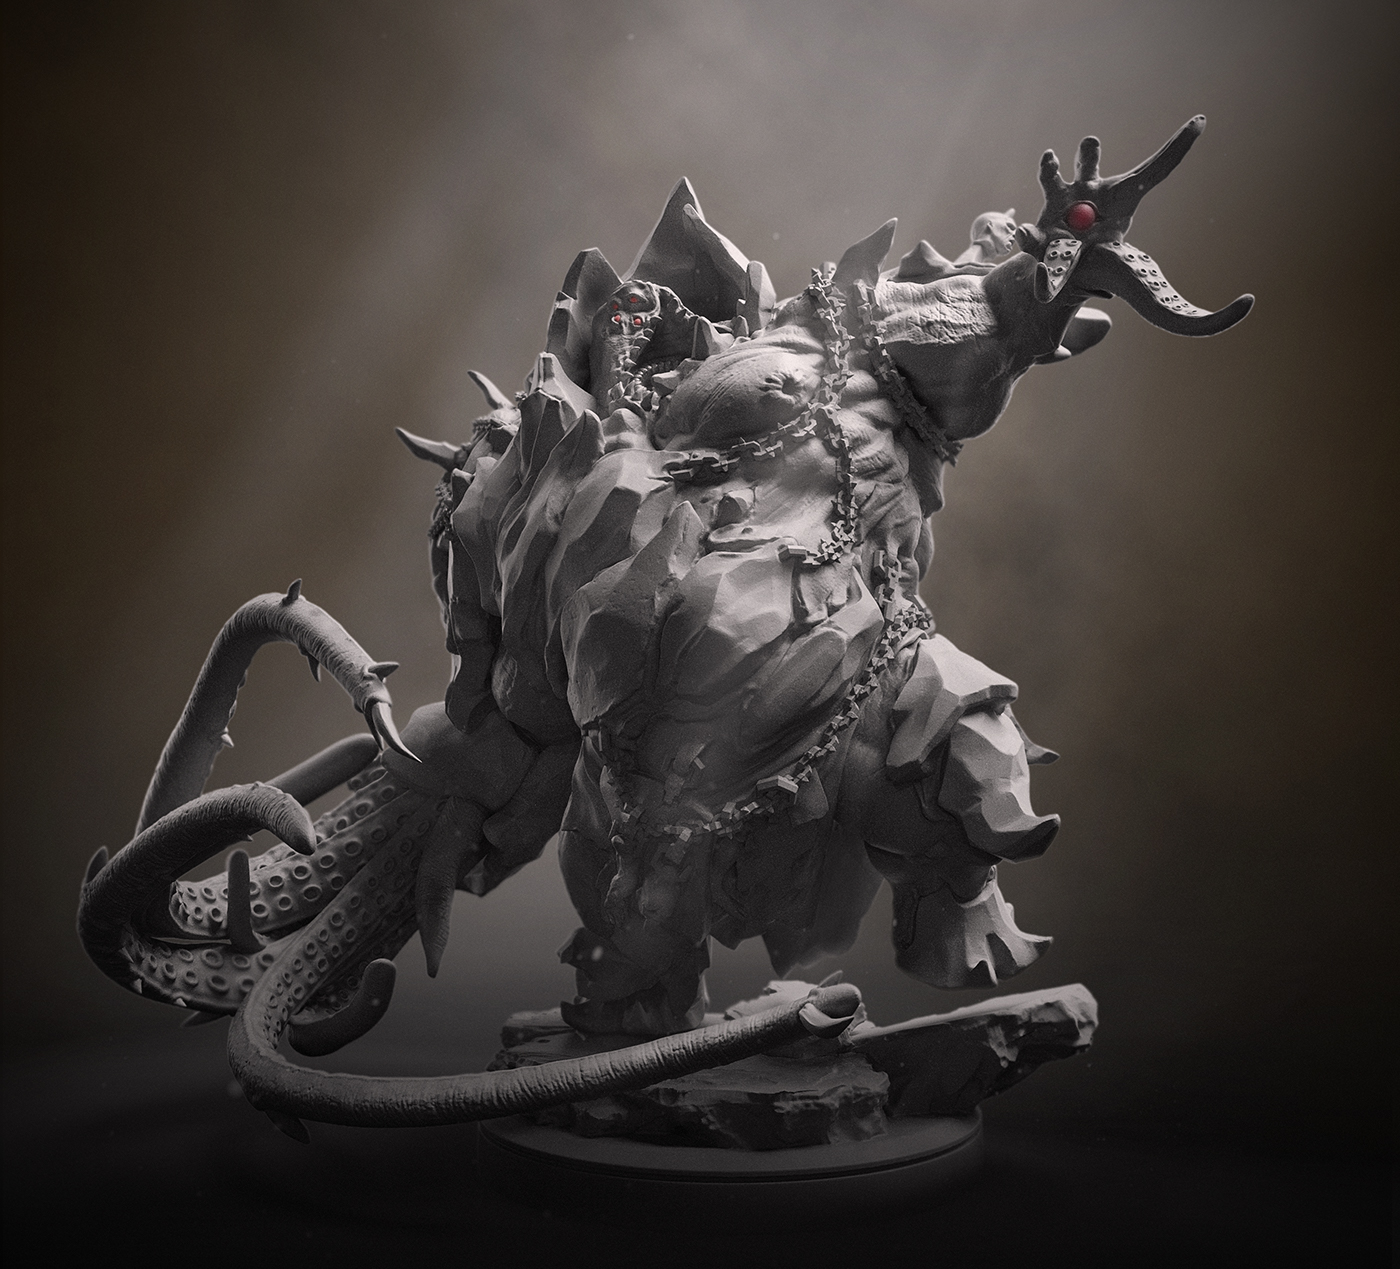 Miniature Board game Sculpt creature monster boss overlord fantasy tentacles octopus chain Armor stone demon